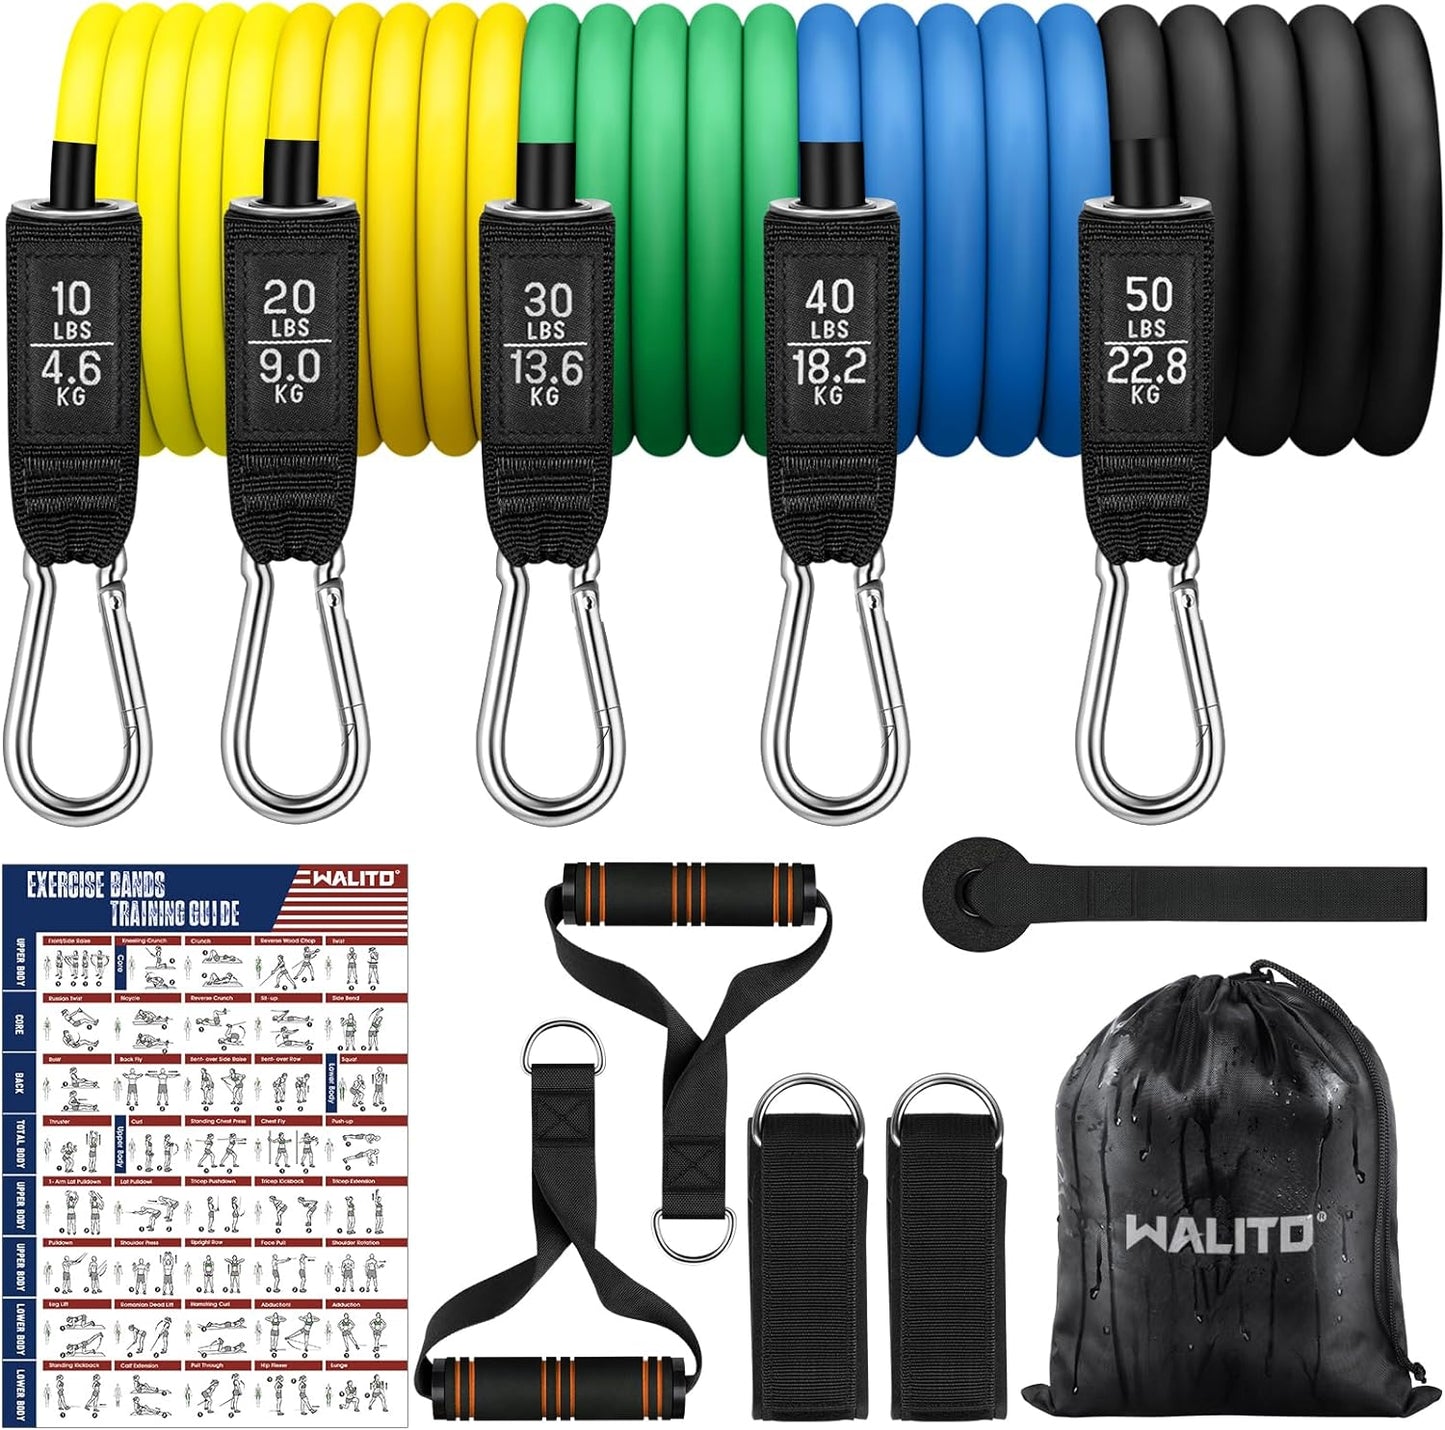 Resistance Bands Set - Exercise Bands with Handles, Door Anchor, Legs Ankle Straps